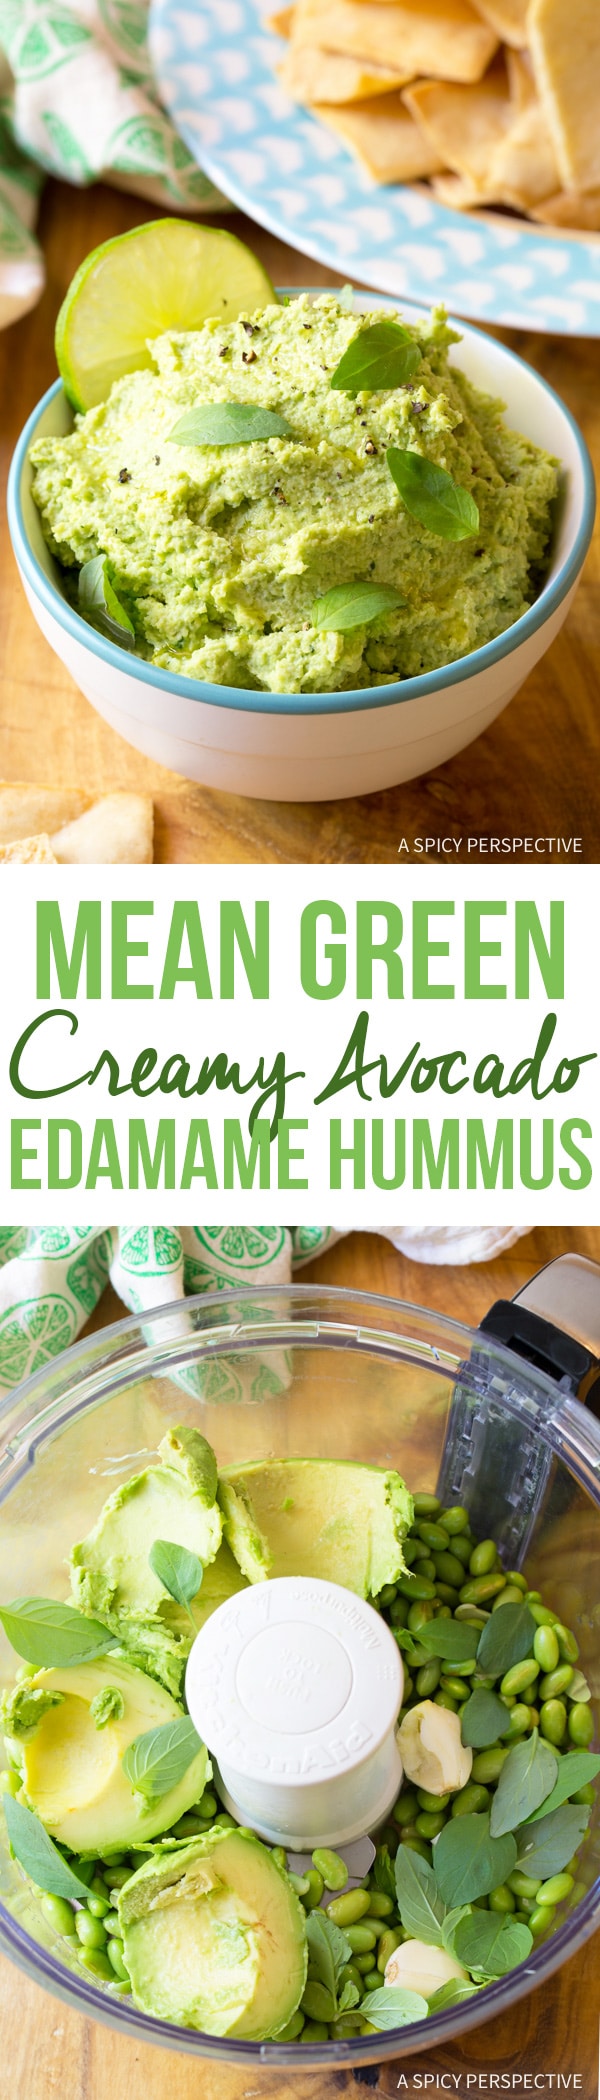 Mean Green Creamy Avocado Edamame Hummus Recipe - Low Carb, Gluten Free, Vegan, Protein-Packed and Delicious!